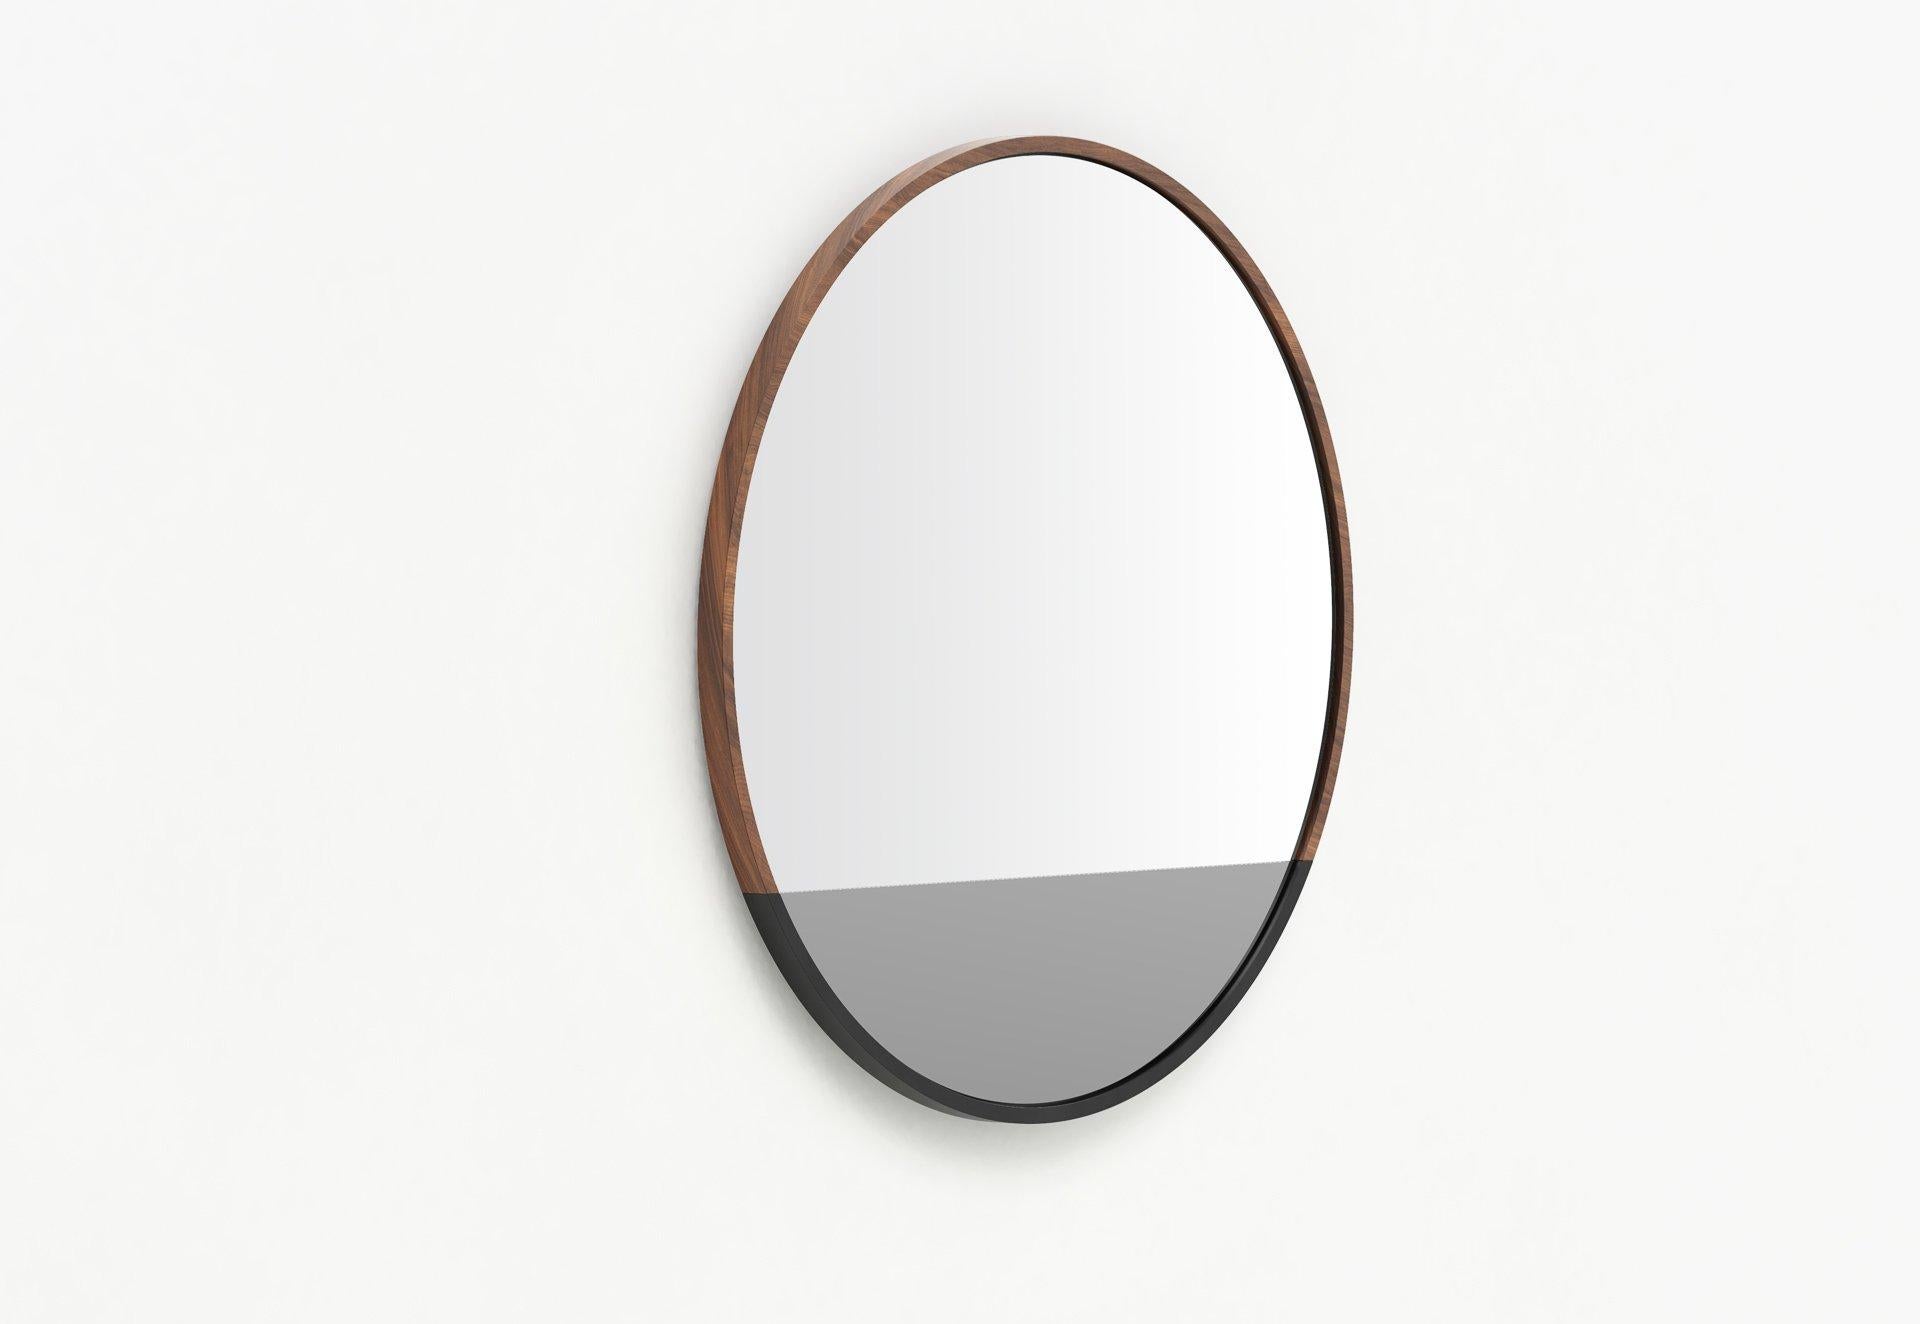 Our Waterline round mirror shares a story within its form. The elegant transitions of mirror and frame material echo the calm after a storm. The waterline mirror was designed in remembrance of Hurricane Sandy and its aftermath on our hard-hit